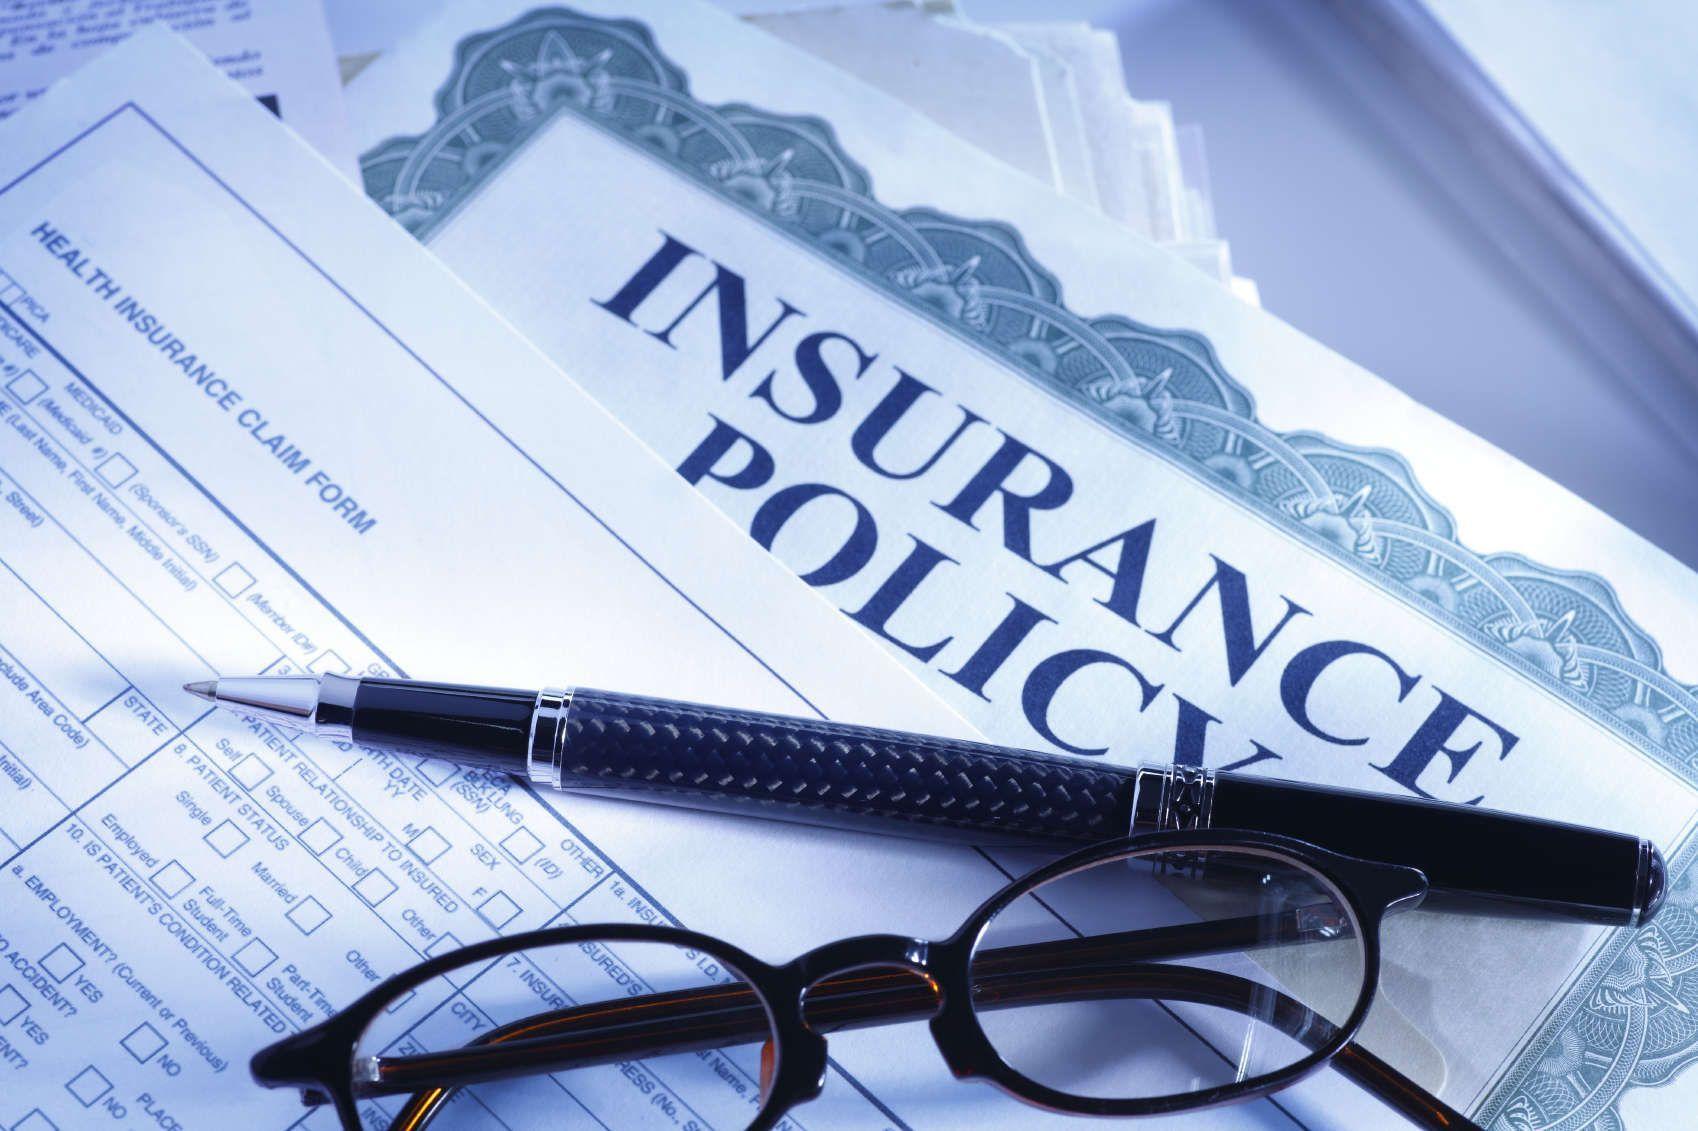 Get the Kind of Insurance You Require: Compare GEICO Insurance Rates